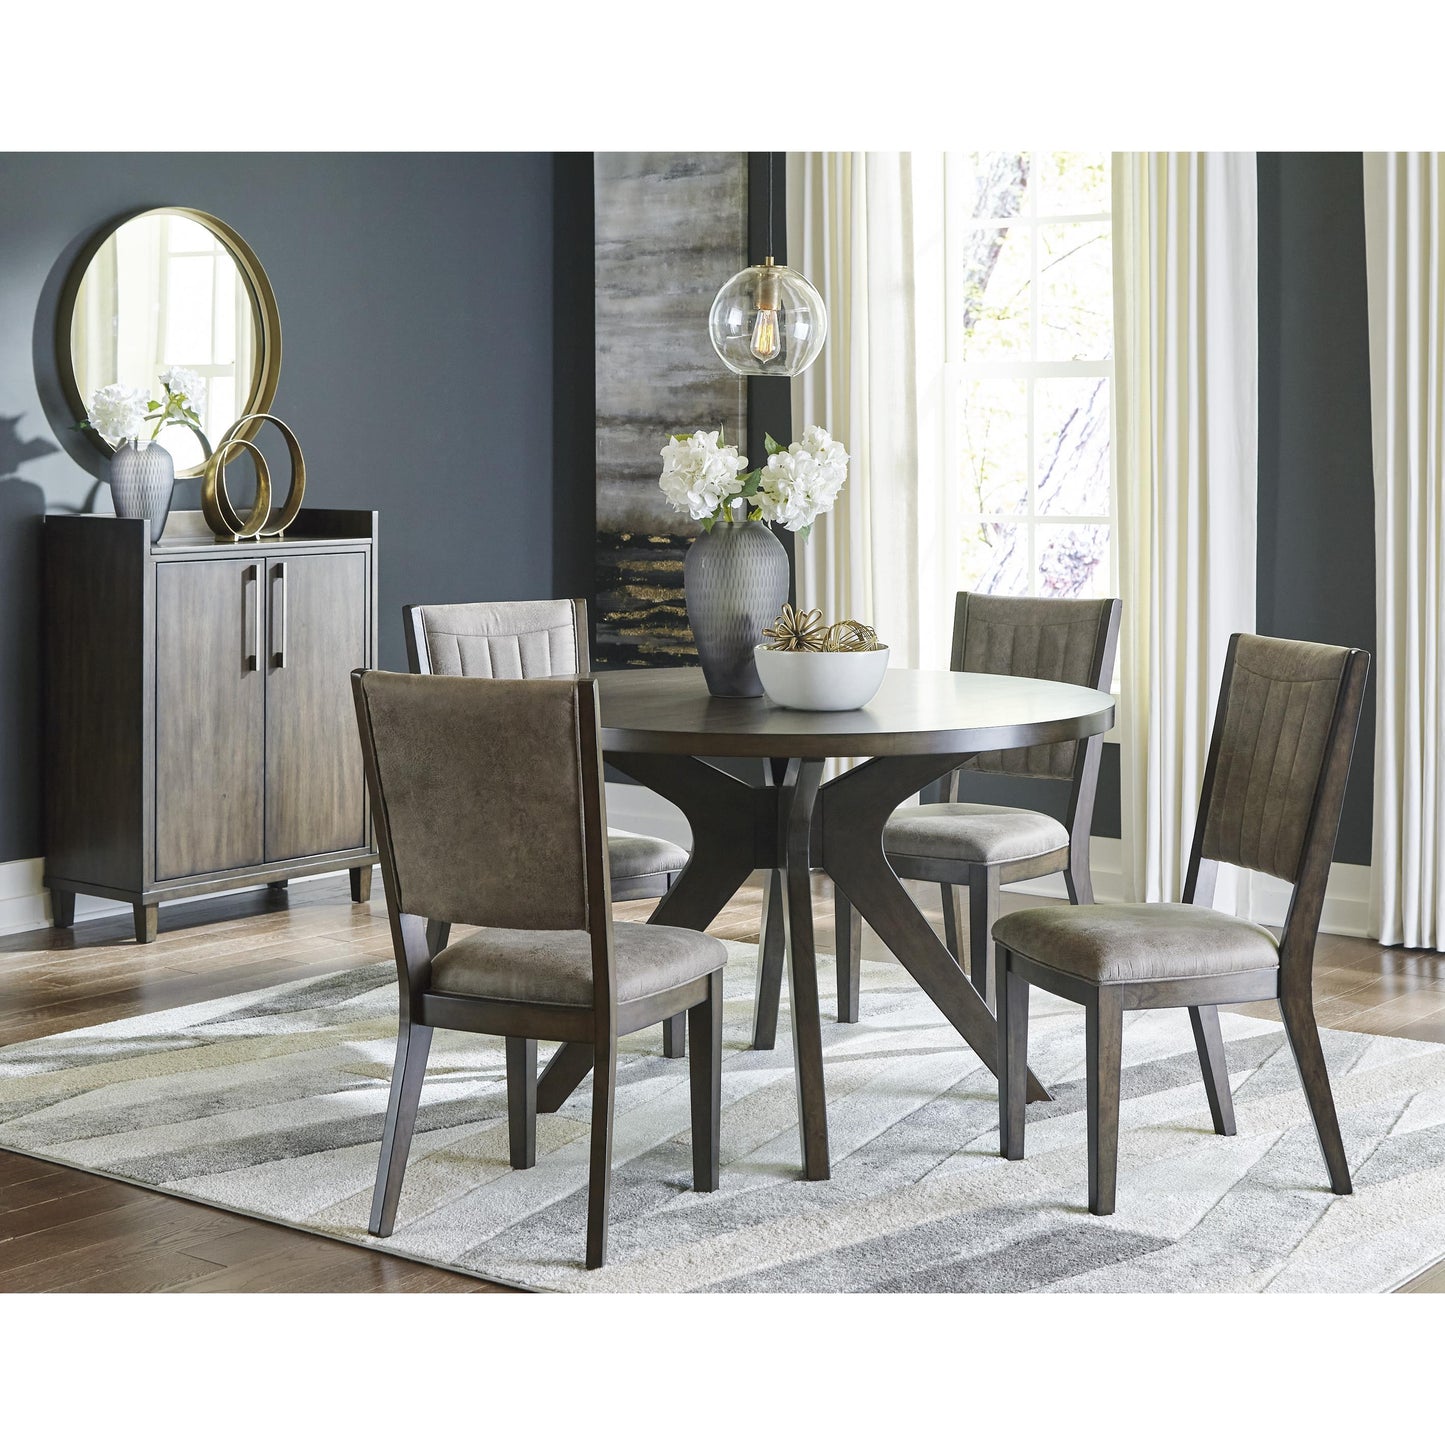 Signature Design by Ashley Round Wittland Dining Table with Pedestal Base D374-15